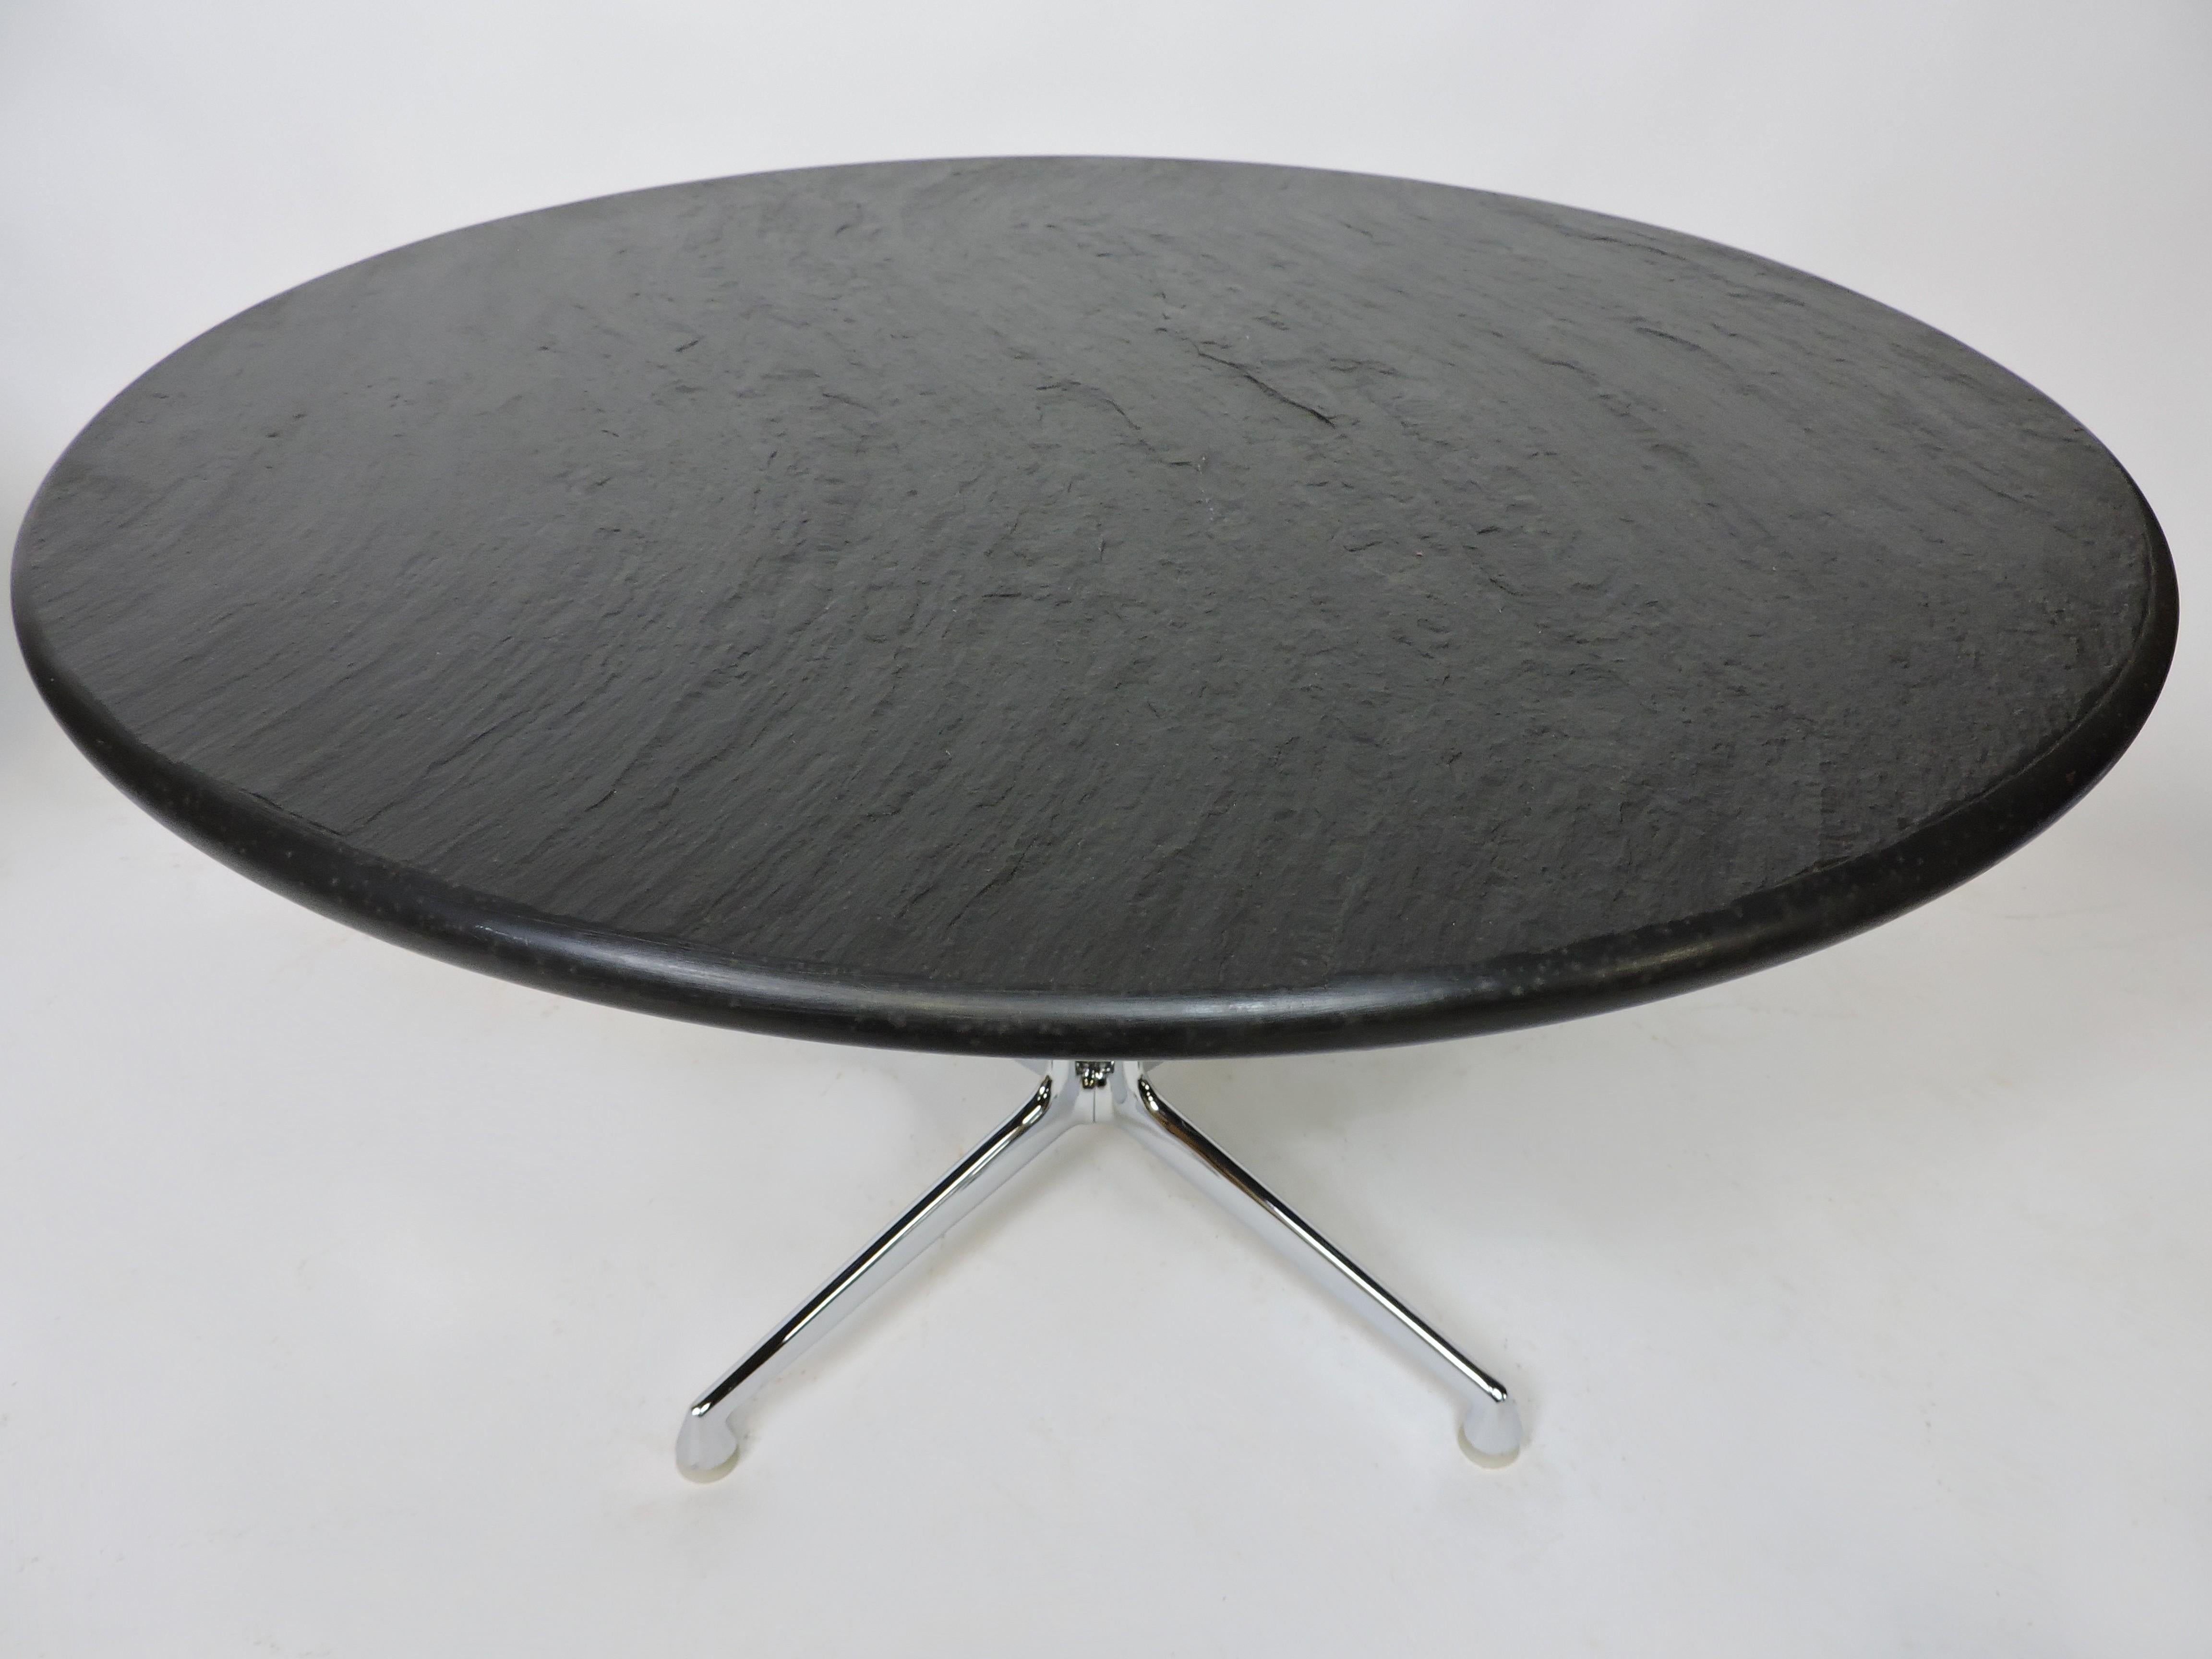 Eames La Fonda Slate Top Coffee or End Table for Herman Miller, 2 Available 1